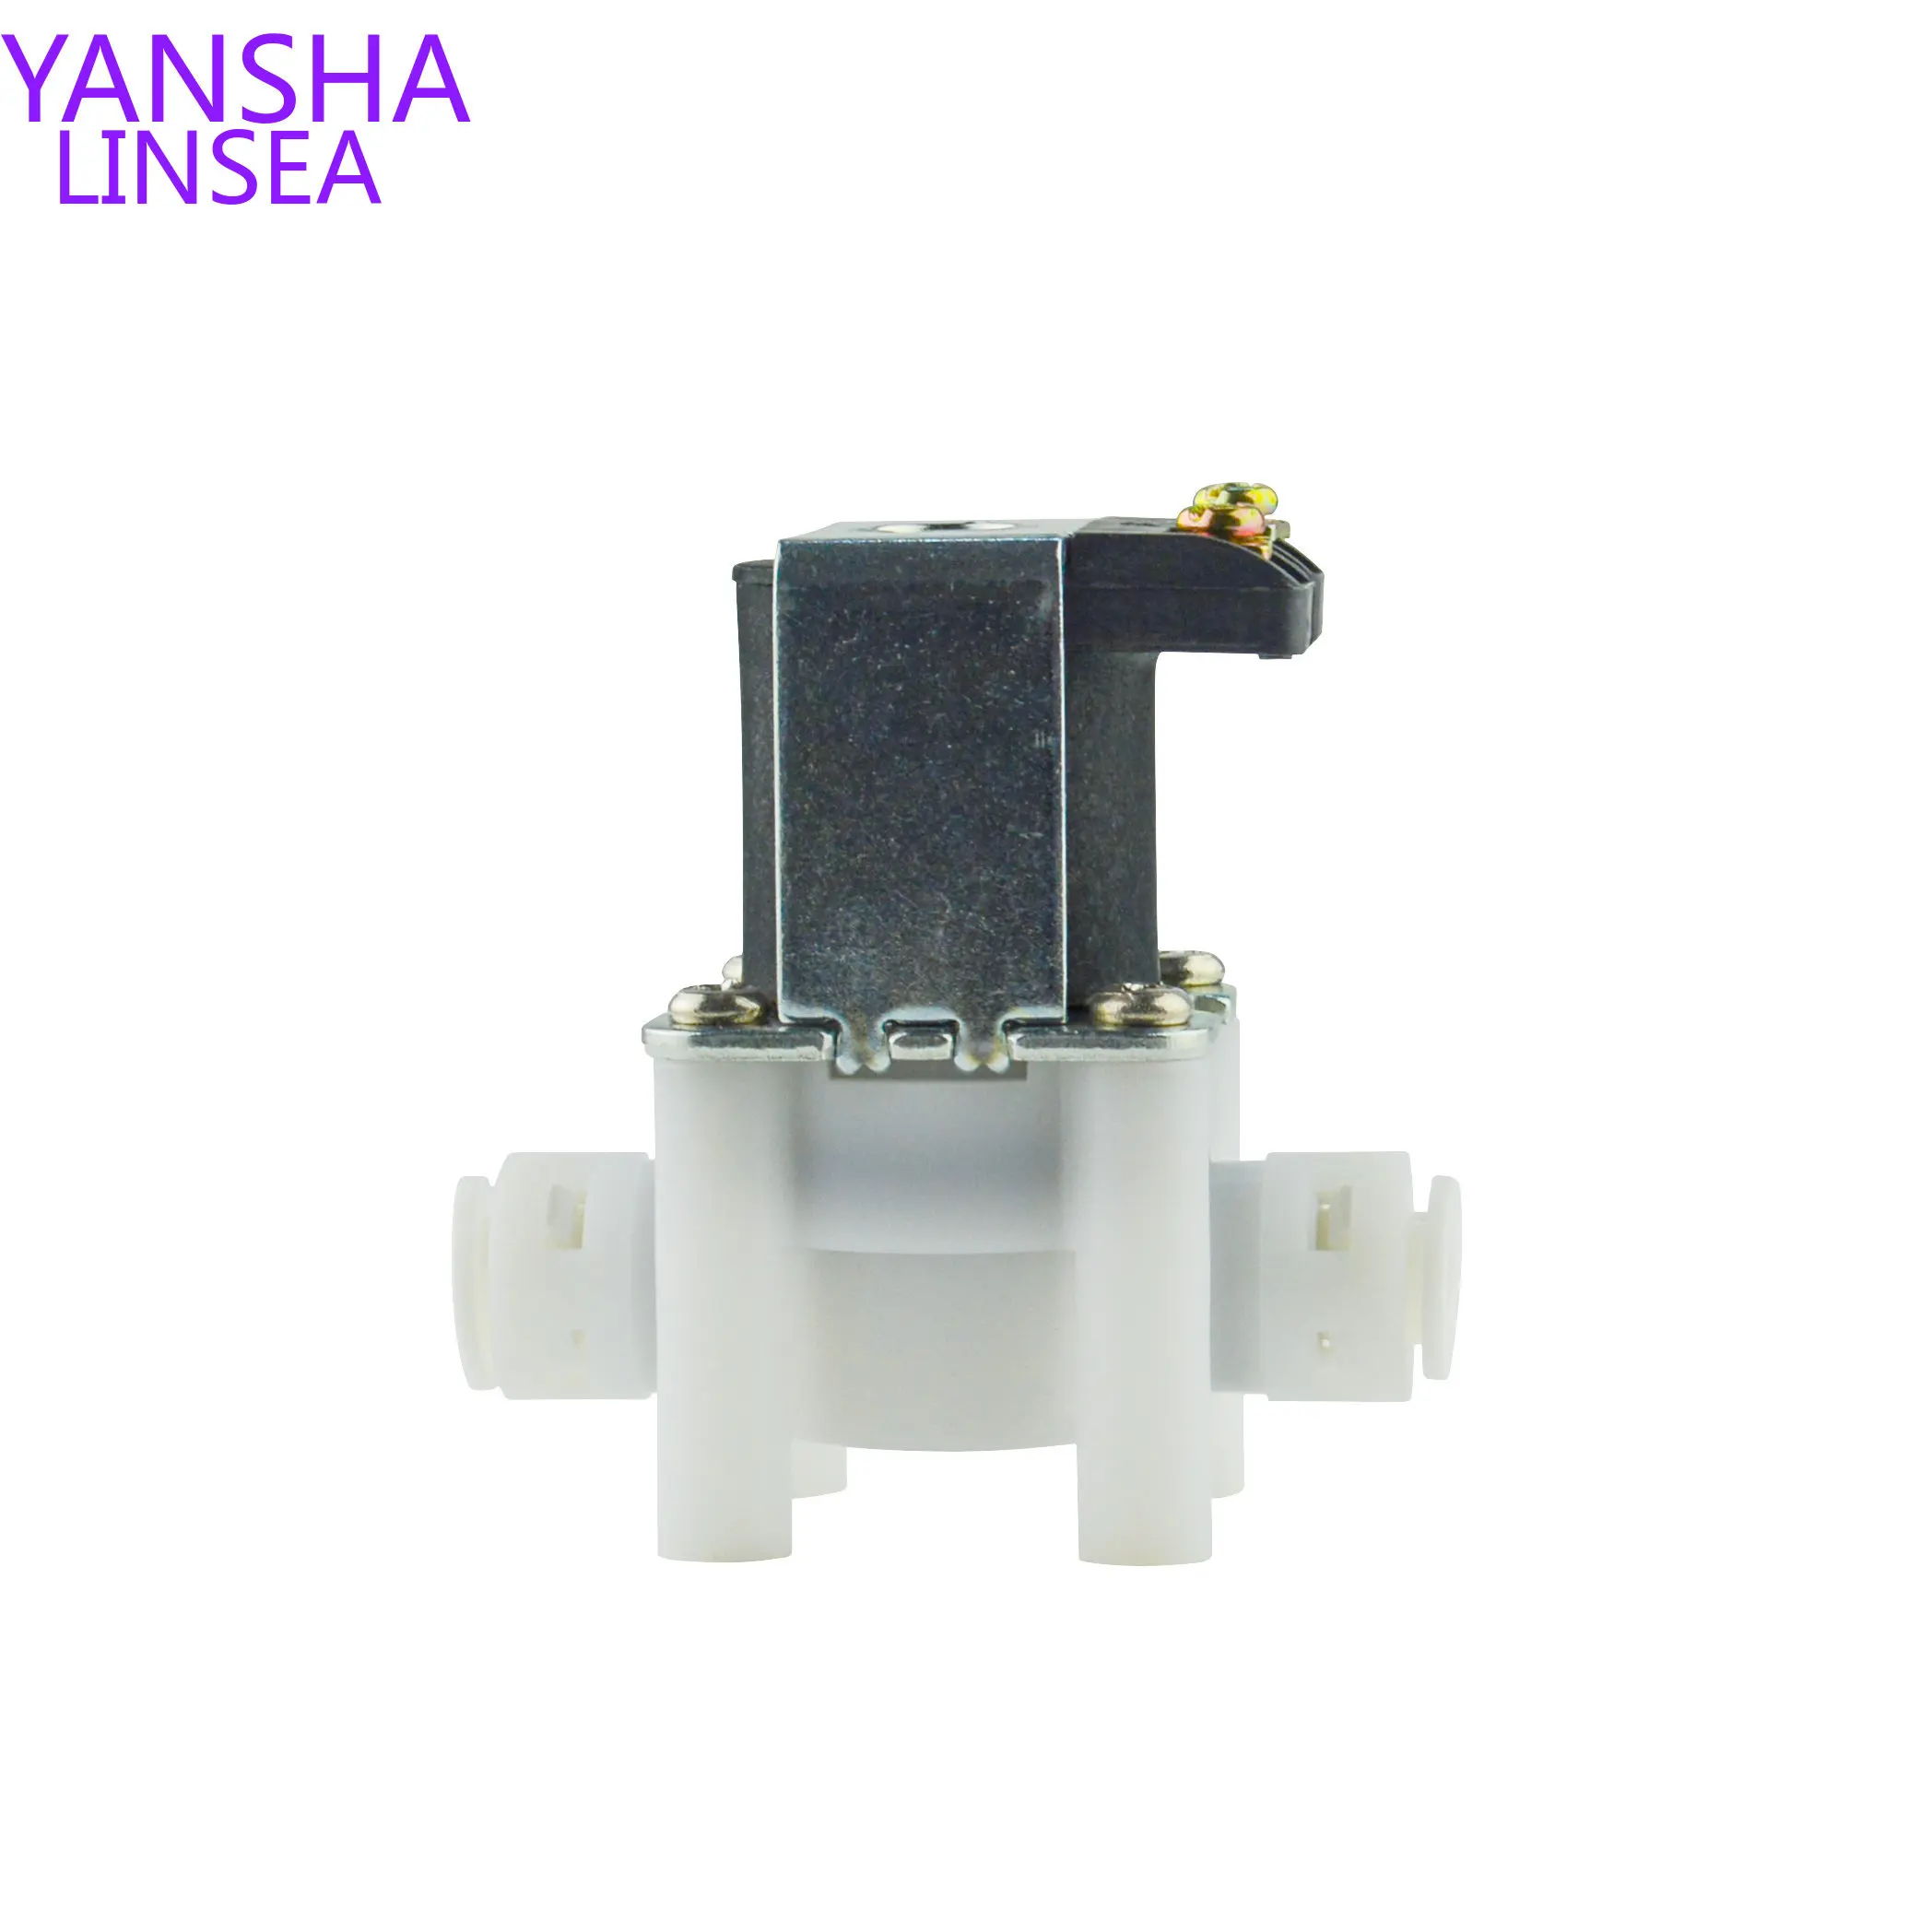 

PFD-0Y01 DC 6/9/12/24V right angle Normally Closed N/C 0.02 to 0.8mpa copper valve body G1/4'' Water Inlet Solenoid Valve